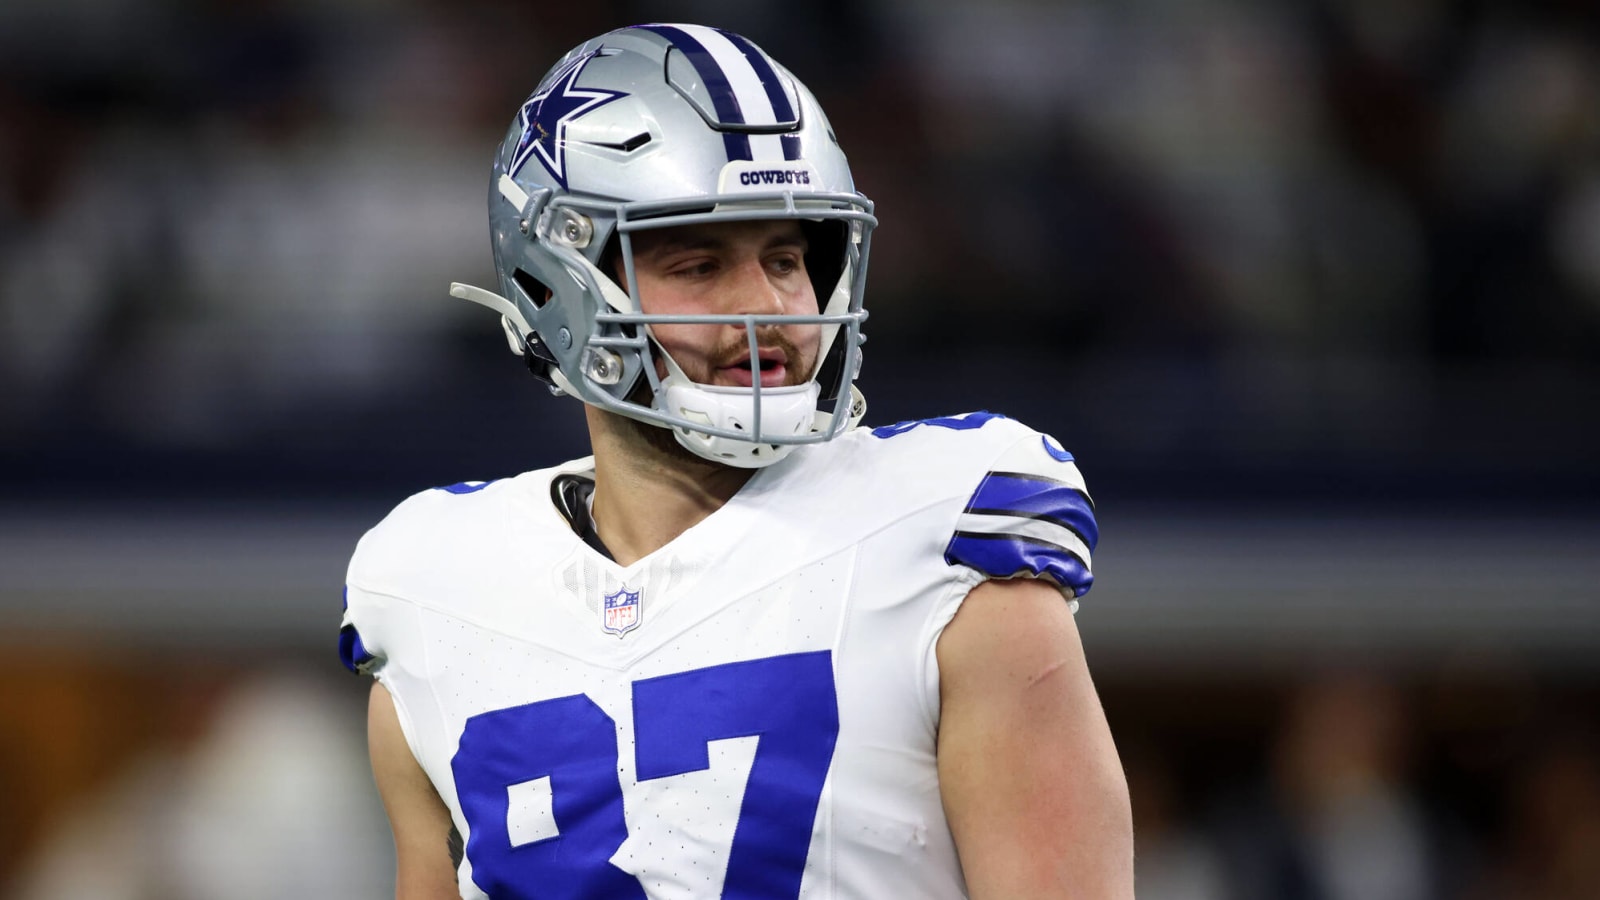 Excess talent at TE will force the Cowboys into tough decisions